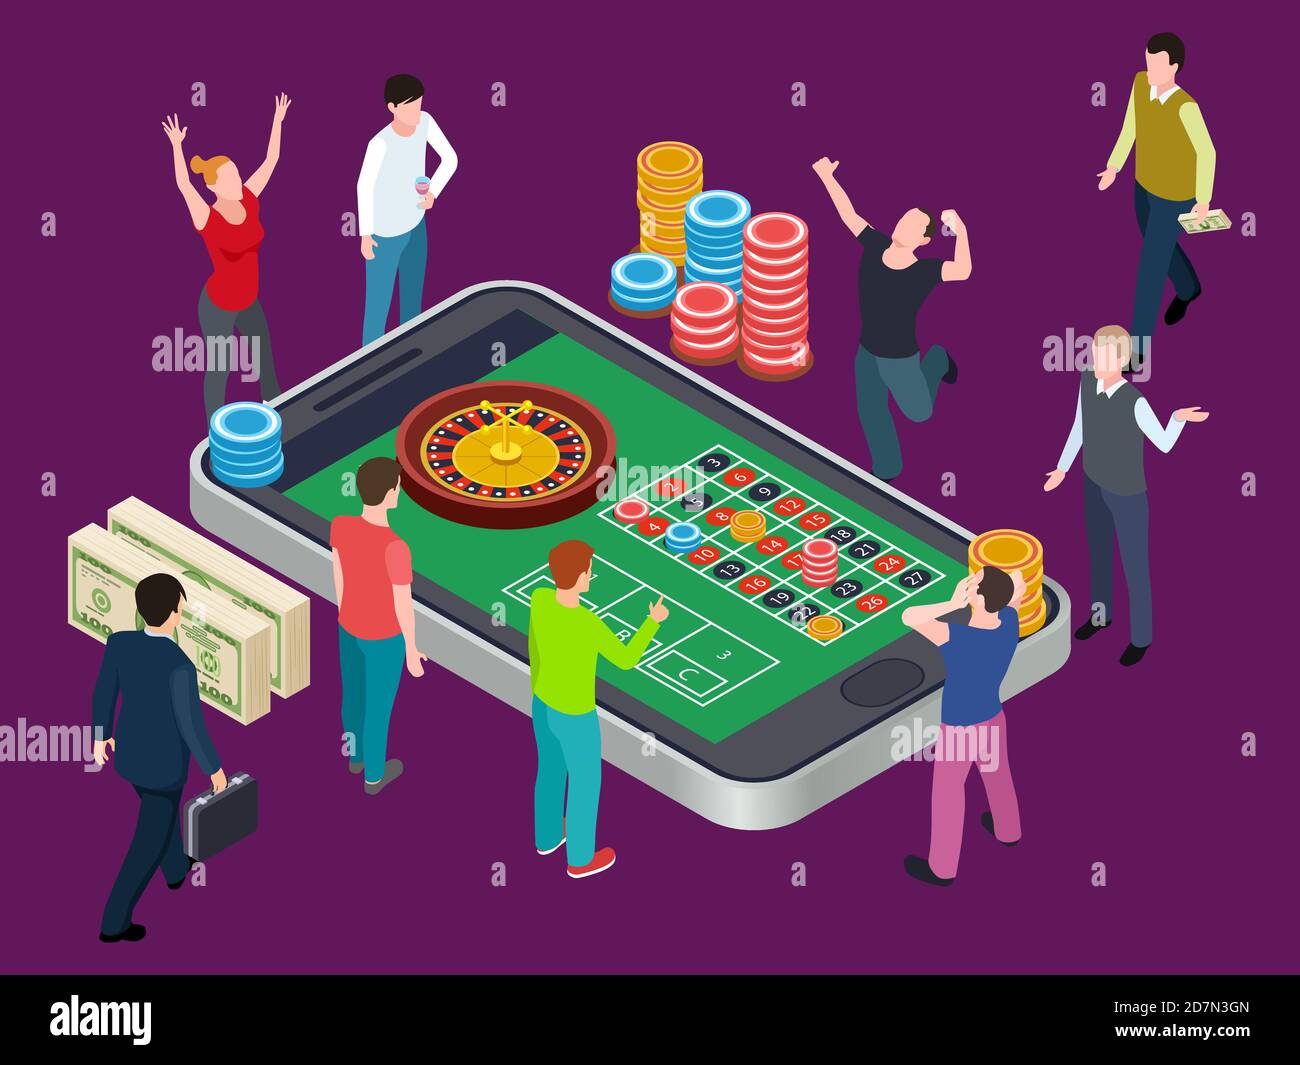 Introducing The Simple Way To casino